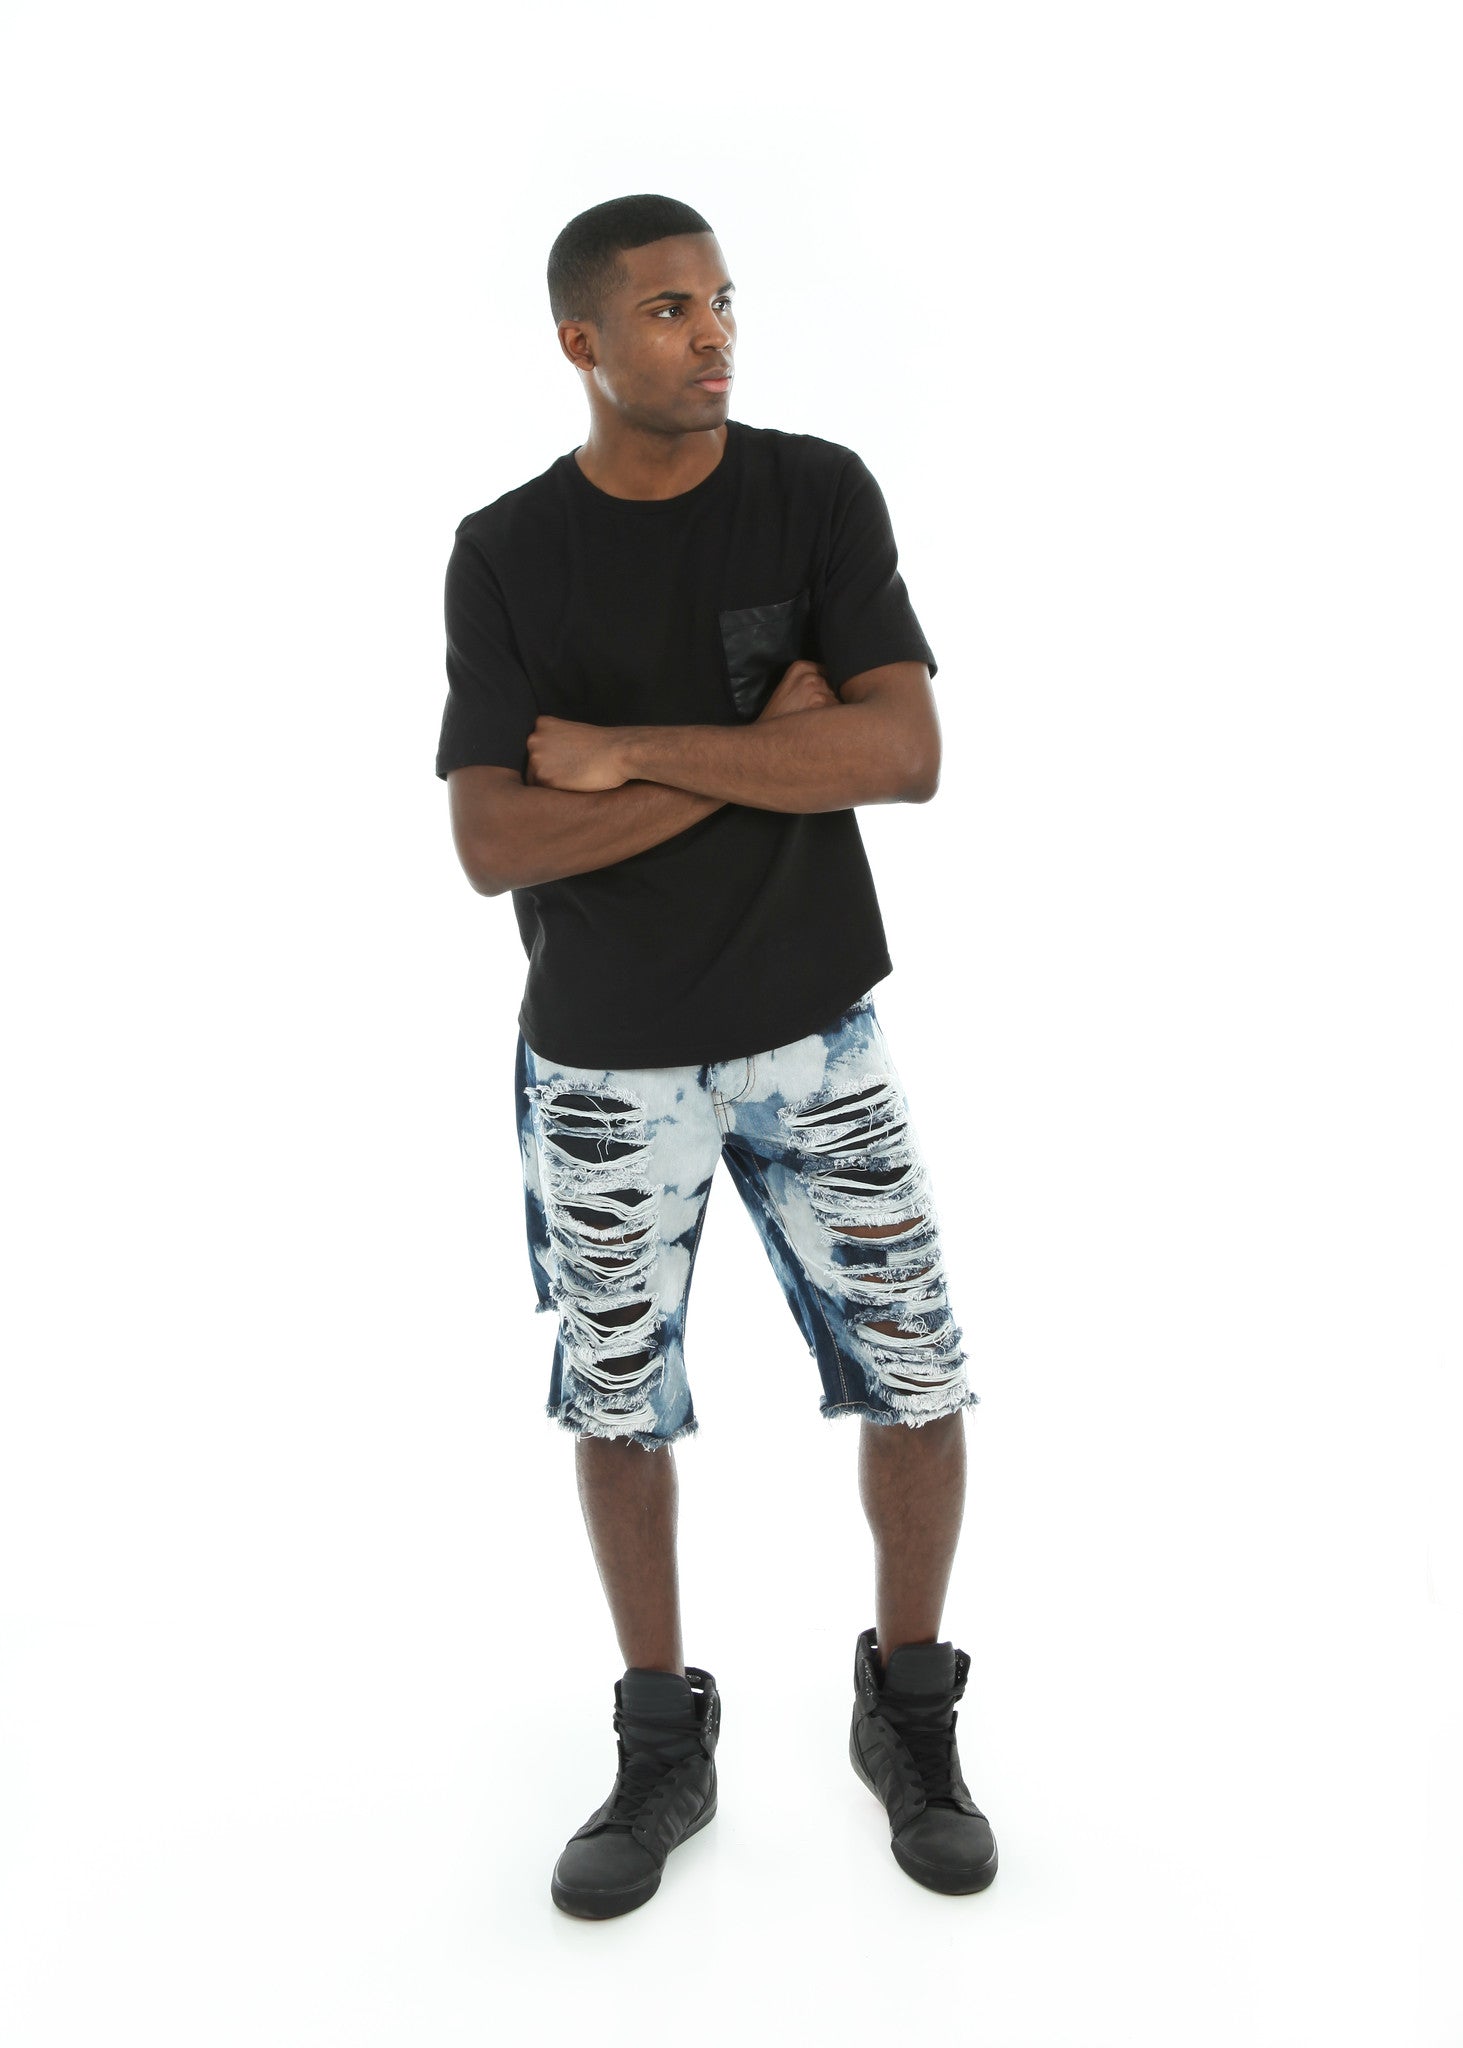 extreme distressed jeans mens